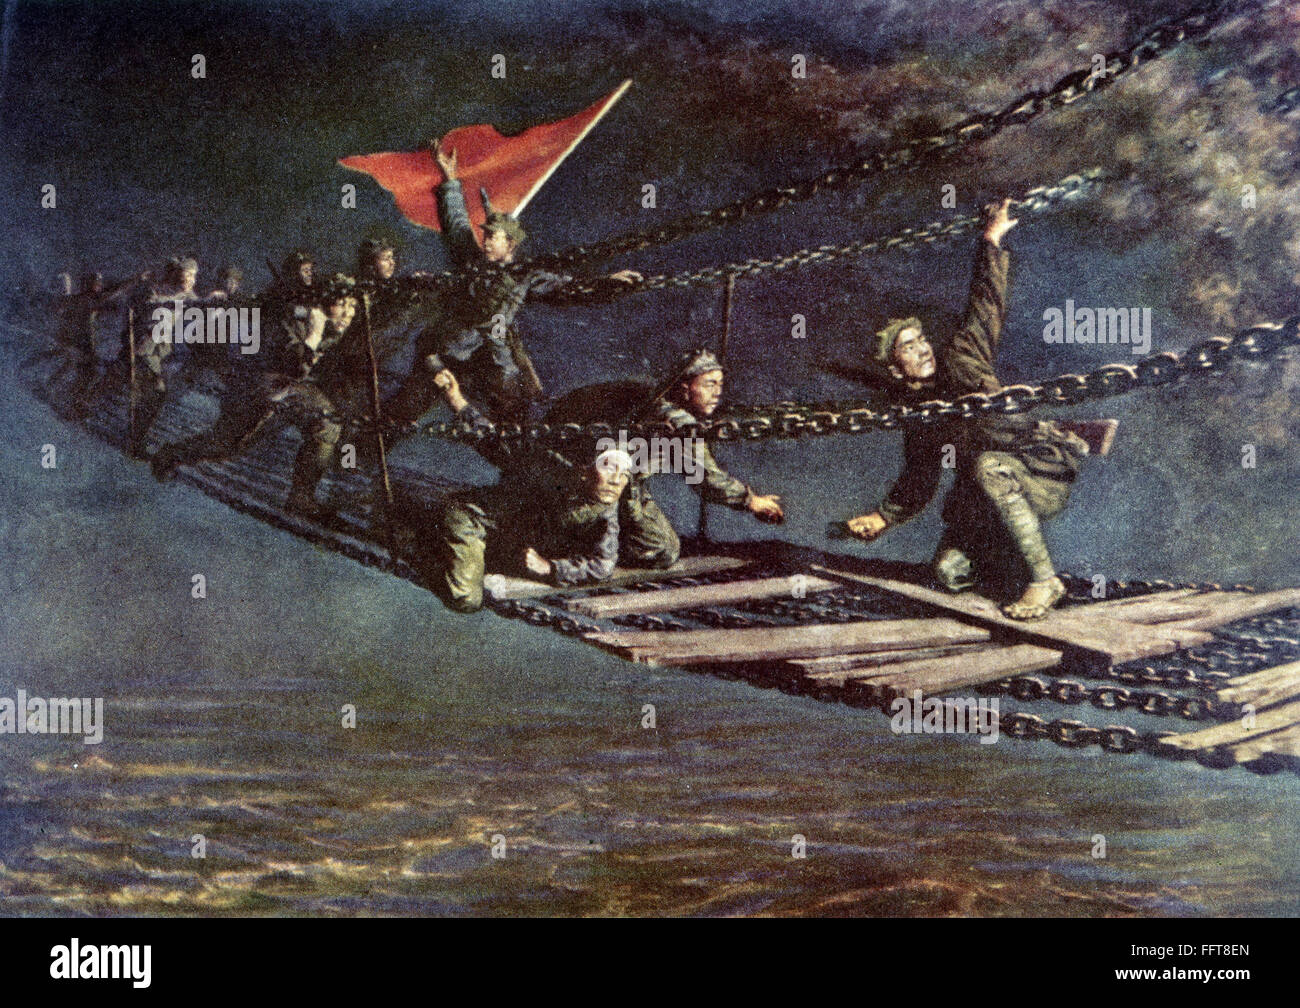 CHINA: LONG MARCH, 1935. /nChinese Communist troops crossing the Luding Bridge over the Ta-tu River in Szechwan province, China, after engaging Nationalist forces during the Long March, 1935. Painting by a Chinese Communist artist. EDITORIAL USE ONLY. Stock Photo